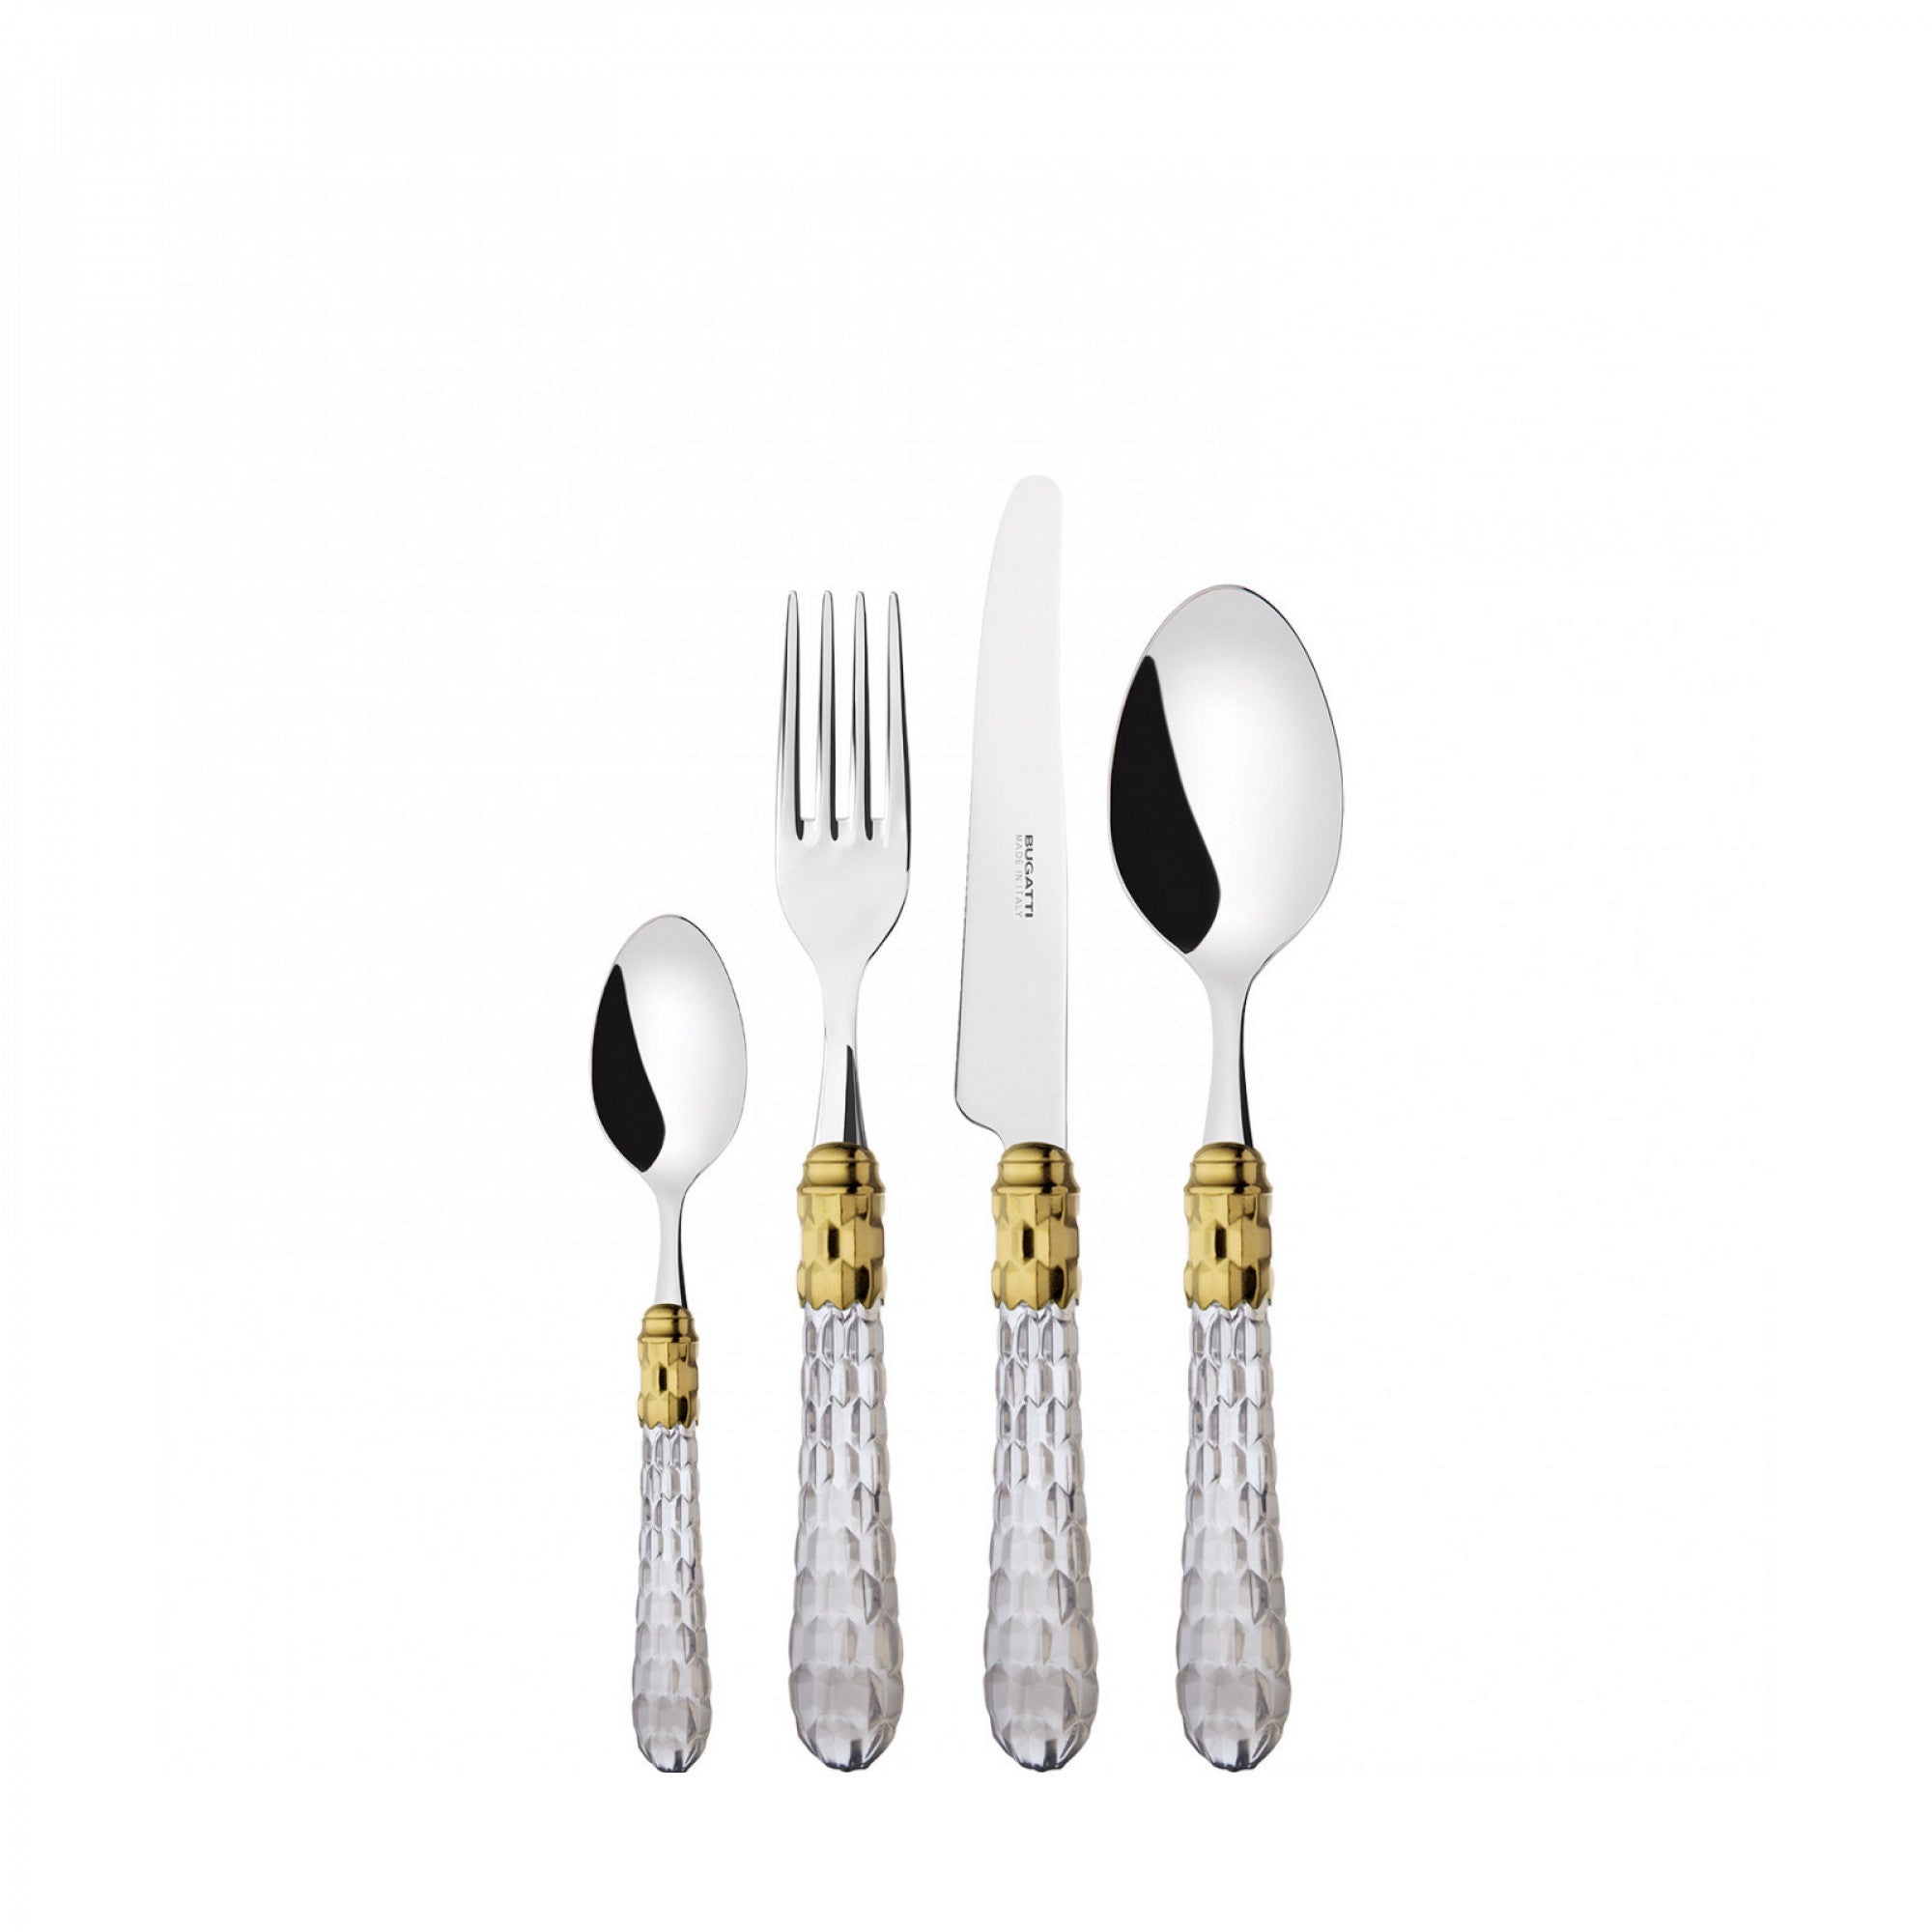 BUGATTI, Cristallo, 24-piece cutlery set in 18/10 stainless steel with golden ring. Packaged in a Compact lithographed box